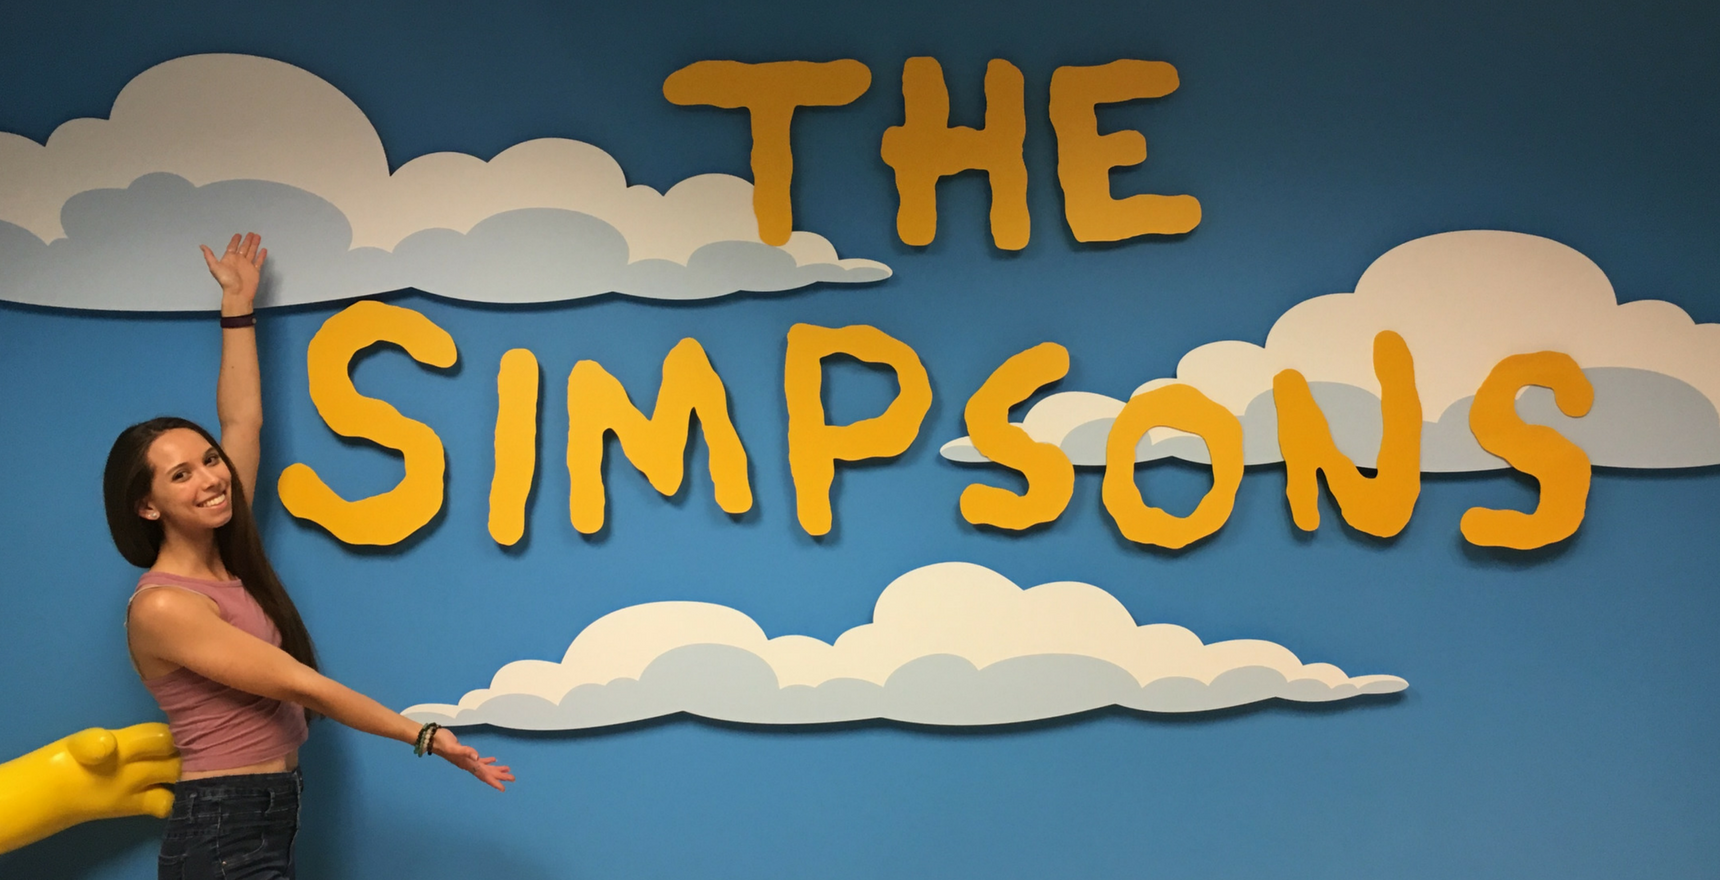 Chloe Dejong posing in front of The Simpsons installation